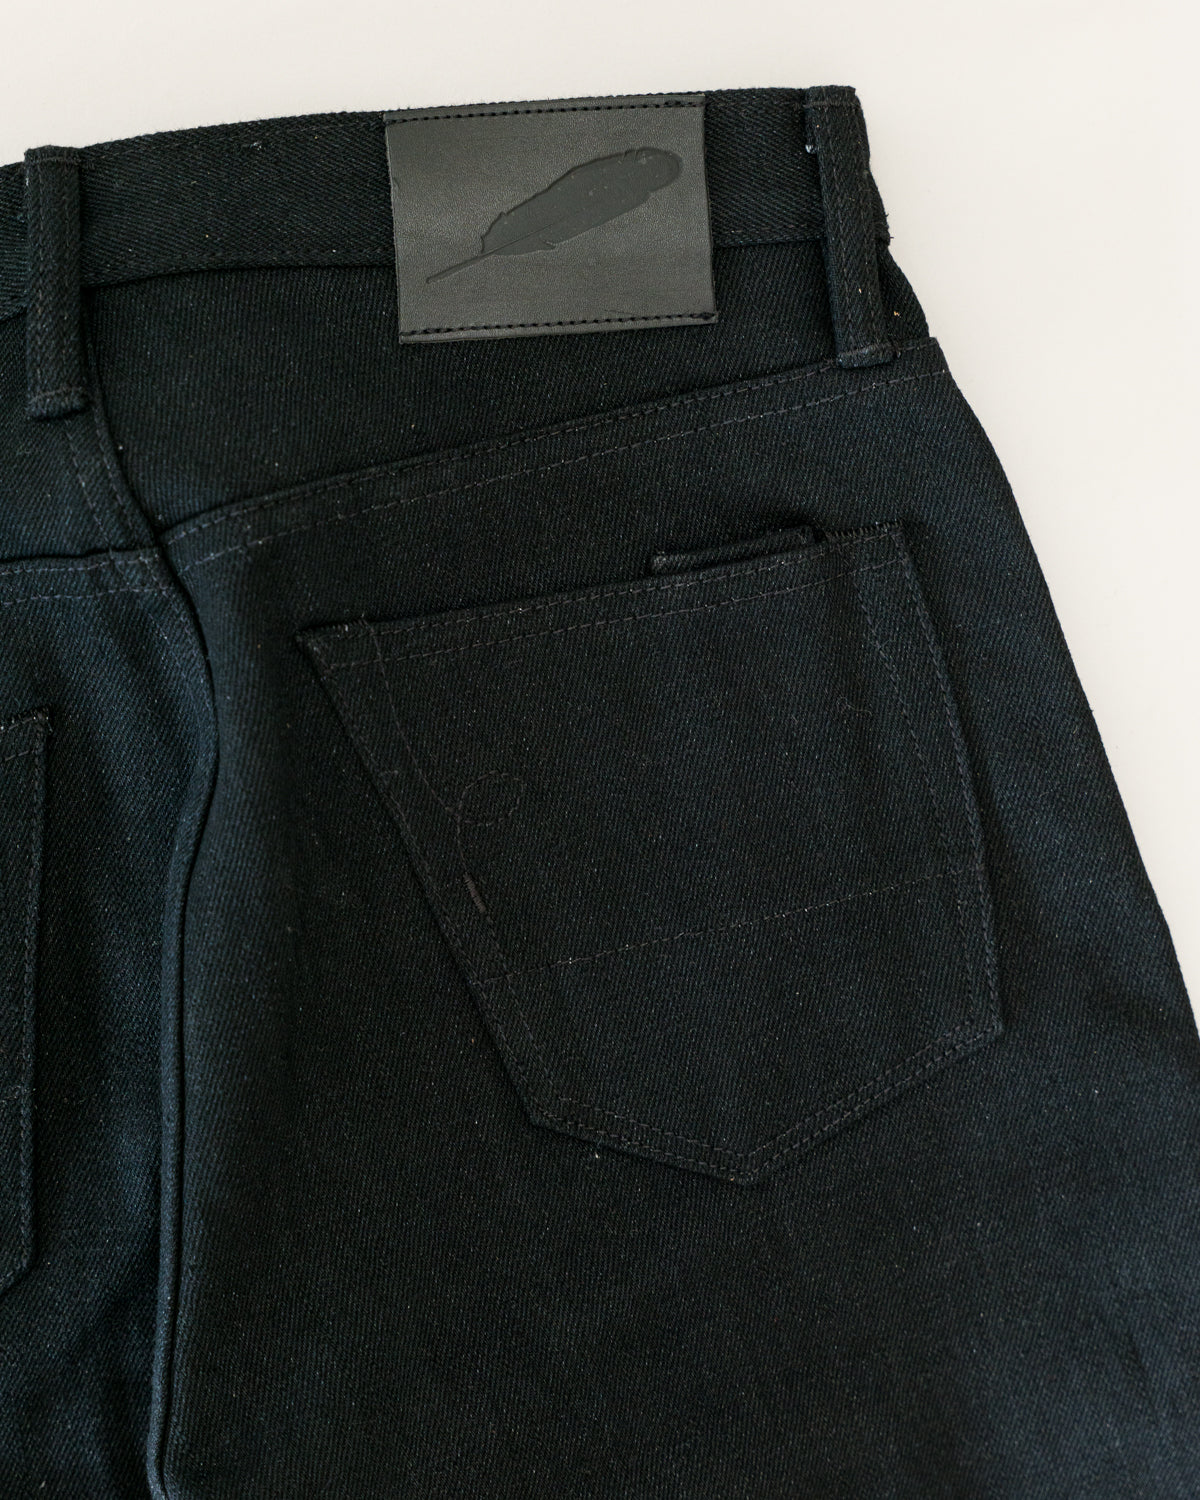 17oz - Cryptic Stealth Selvedge - Silveridge Fit